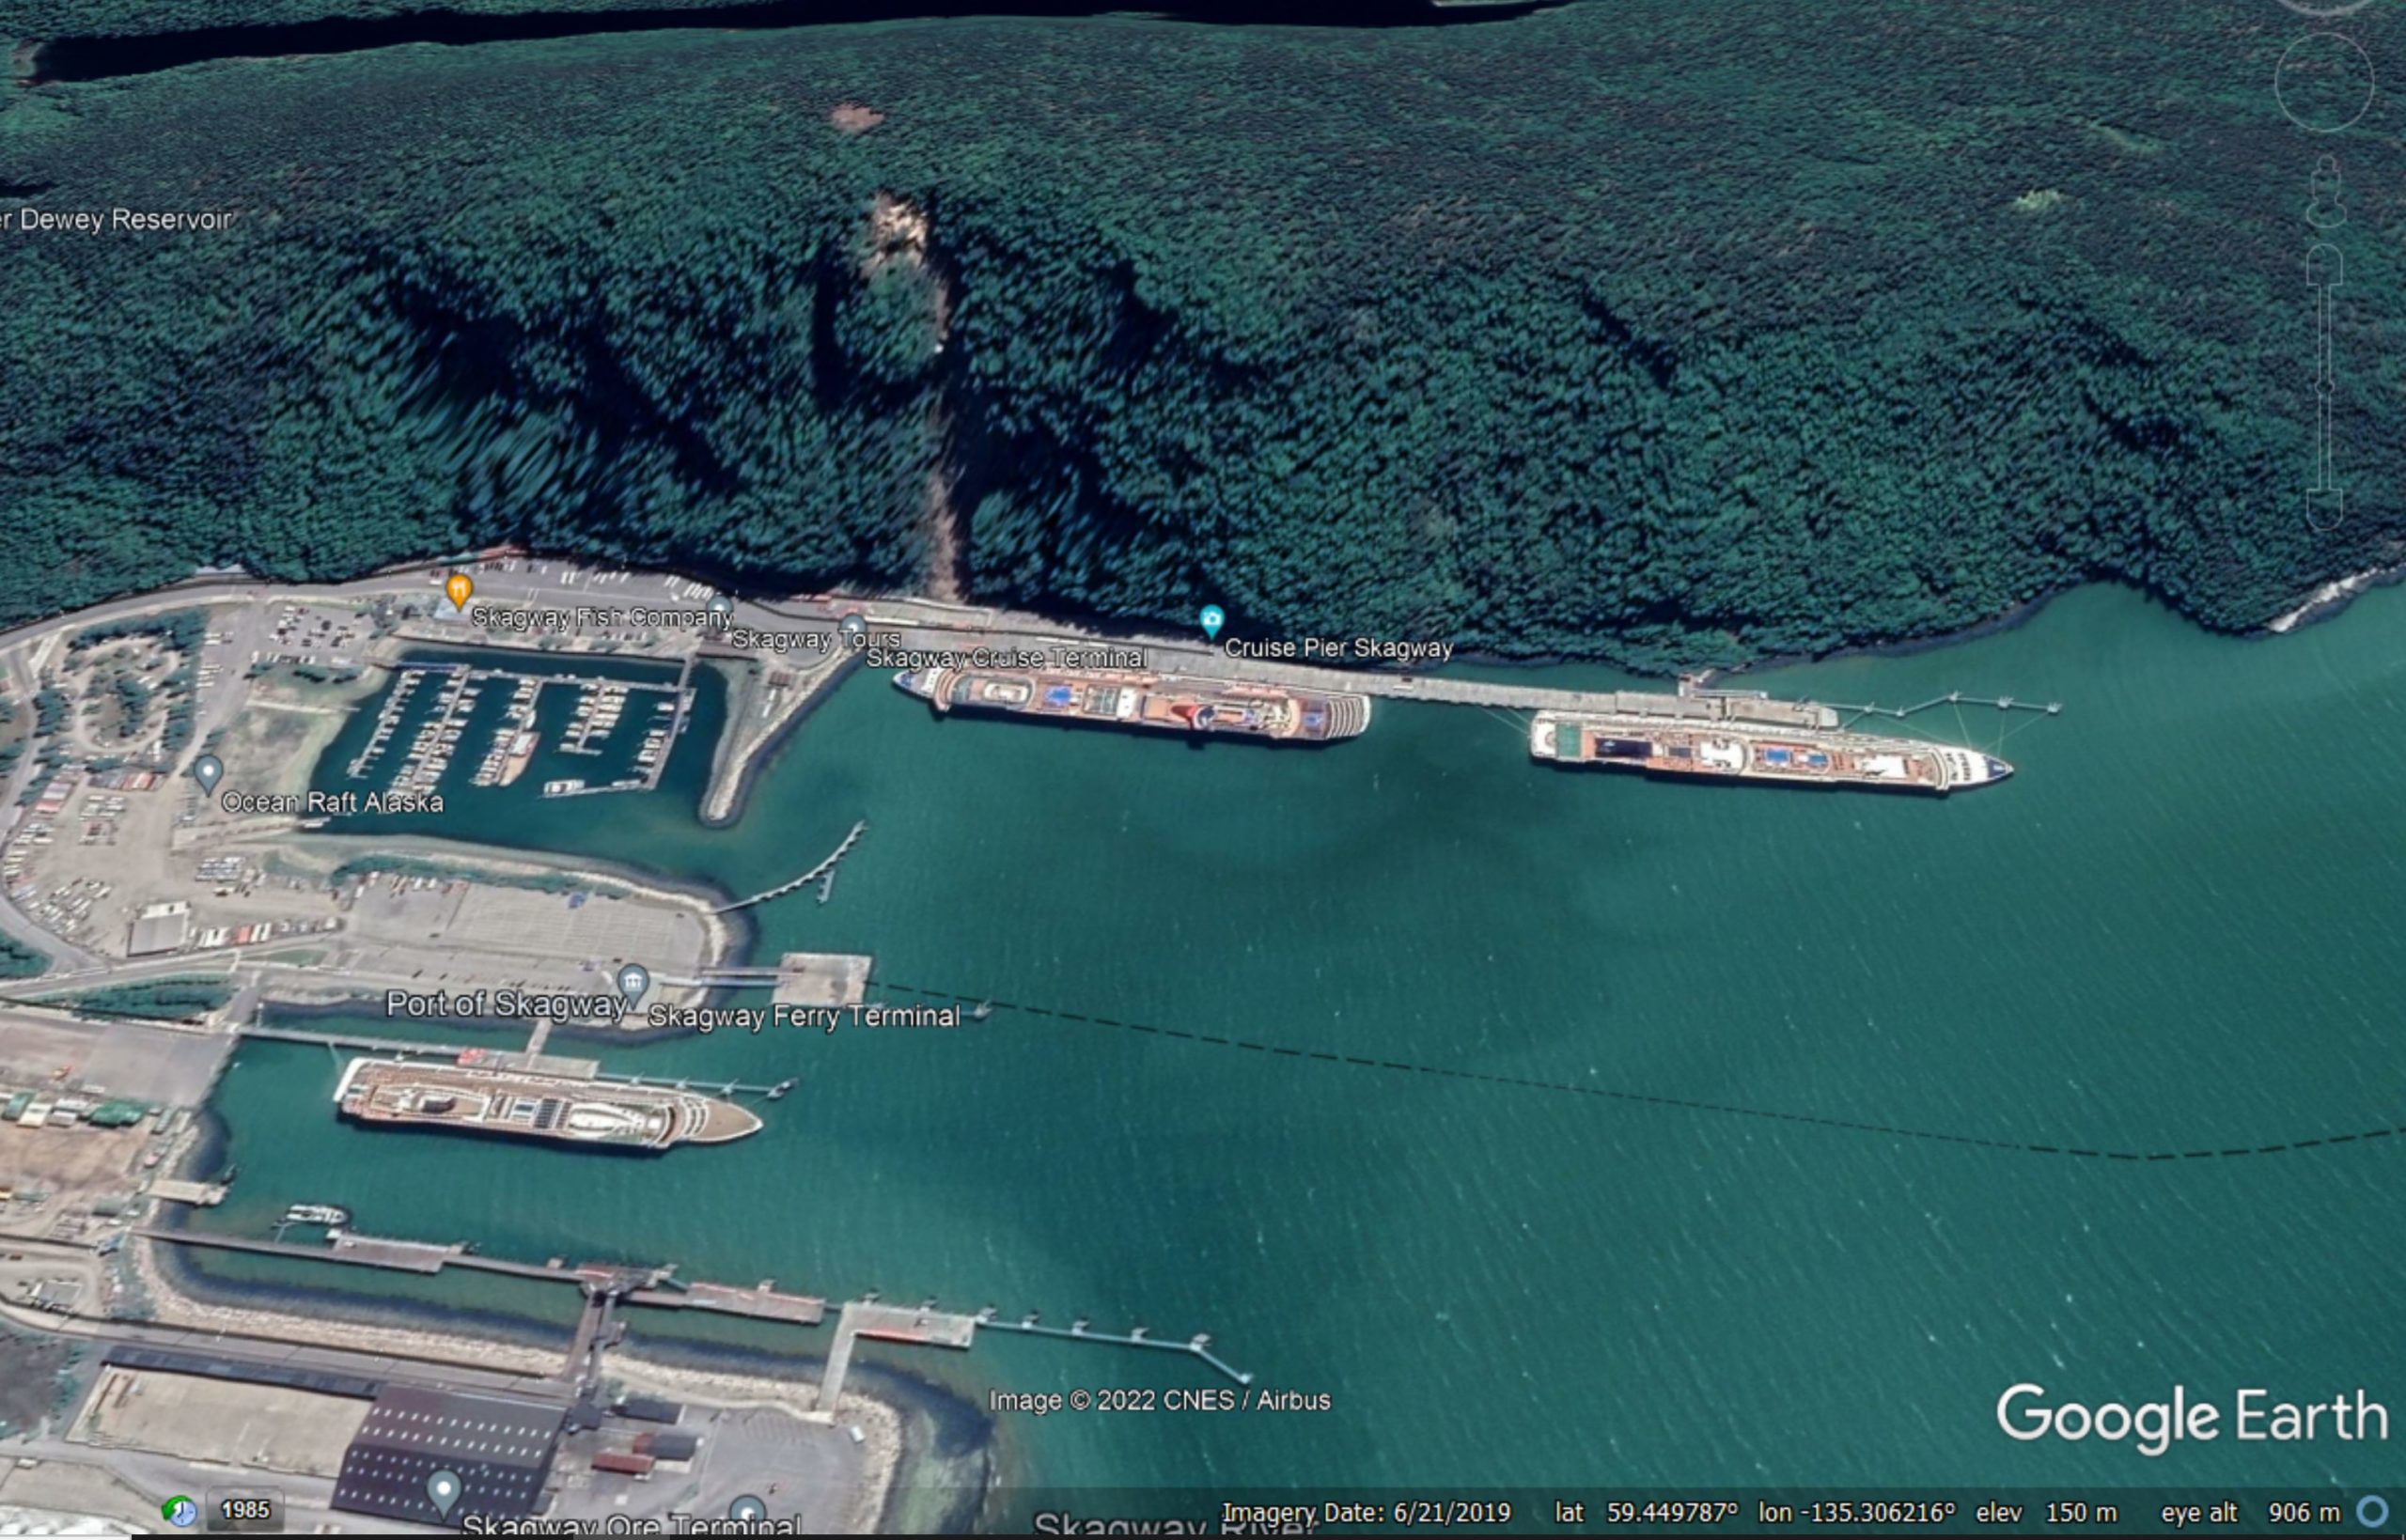 Google Earth image of the port at Skagway.